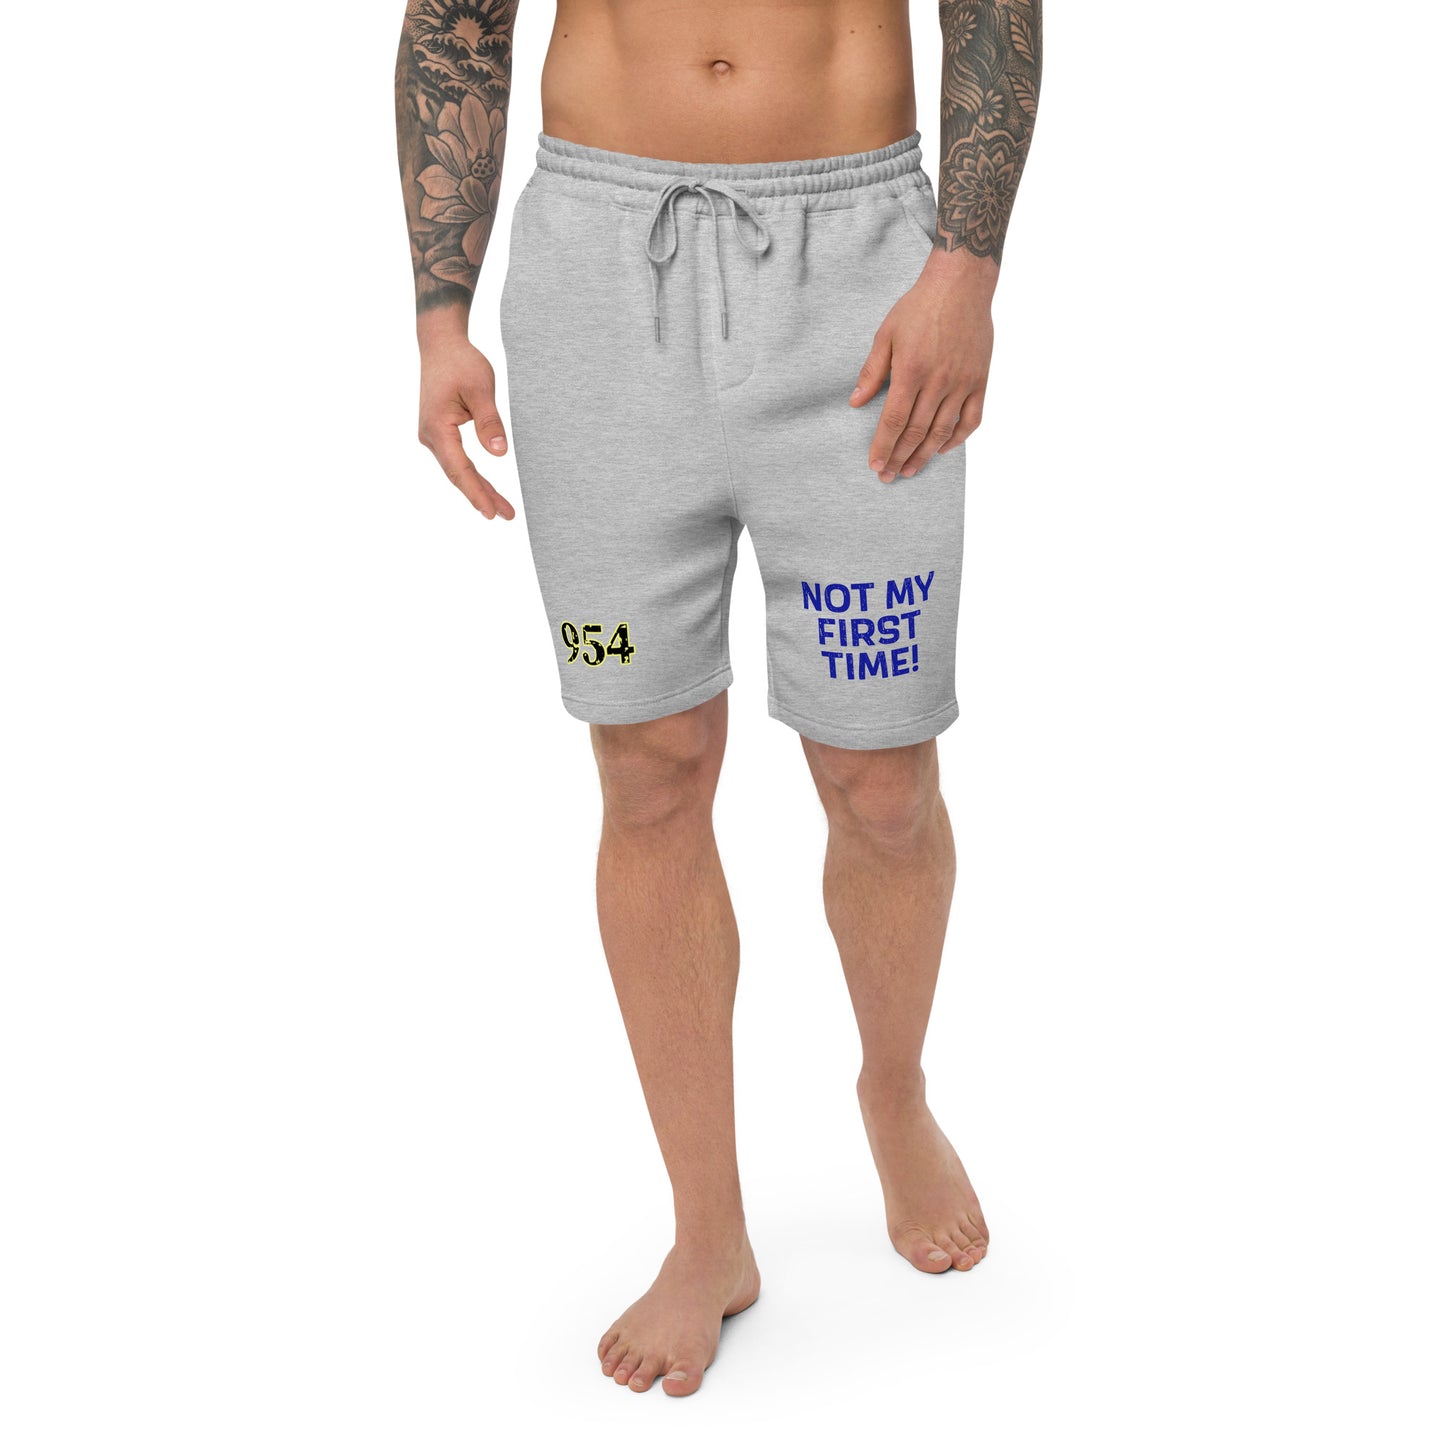 Not my first time 954 Signature Grey or White Men's fleece shorts